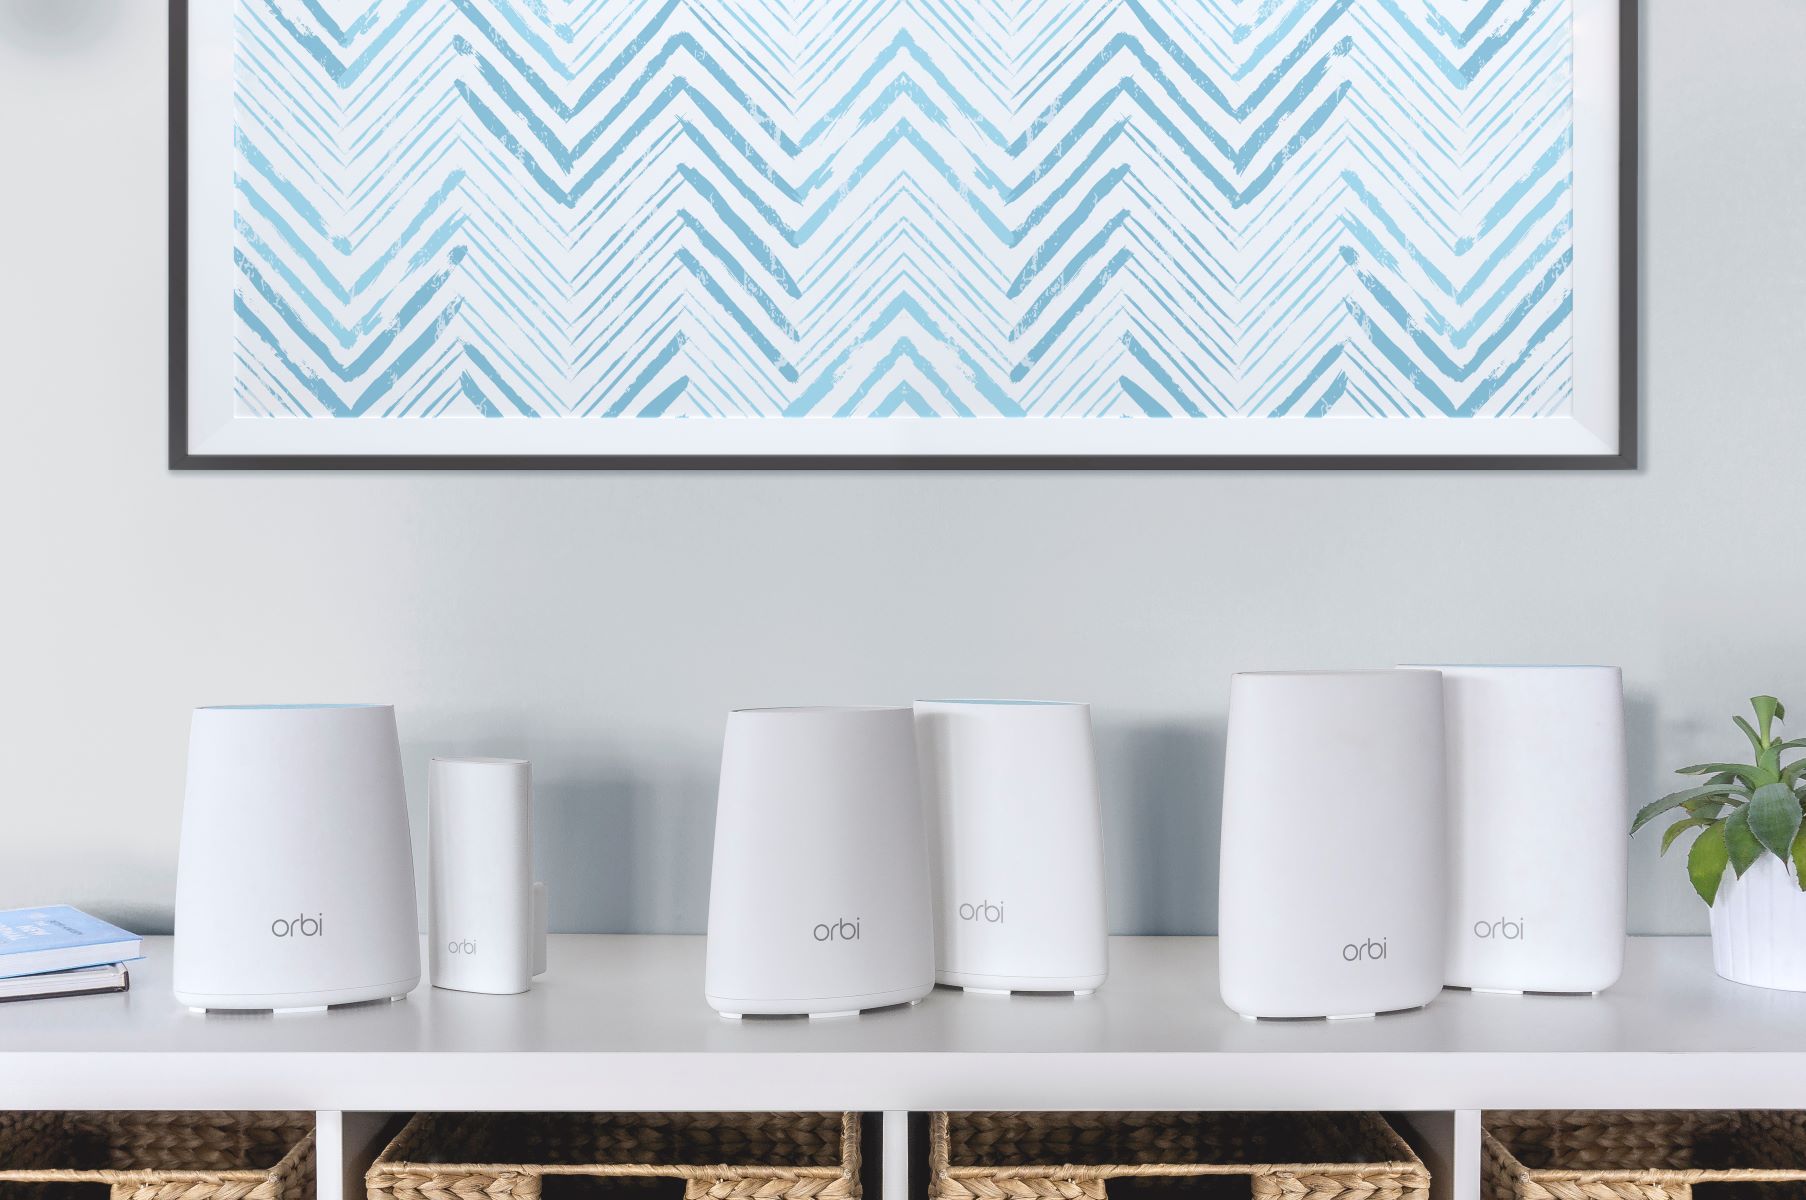 How To Connect Two Orbi Routers